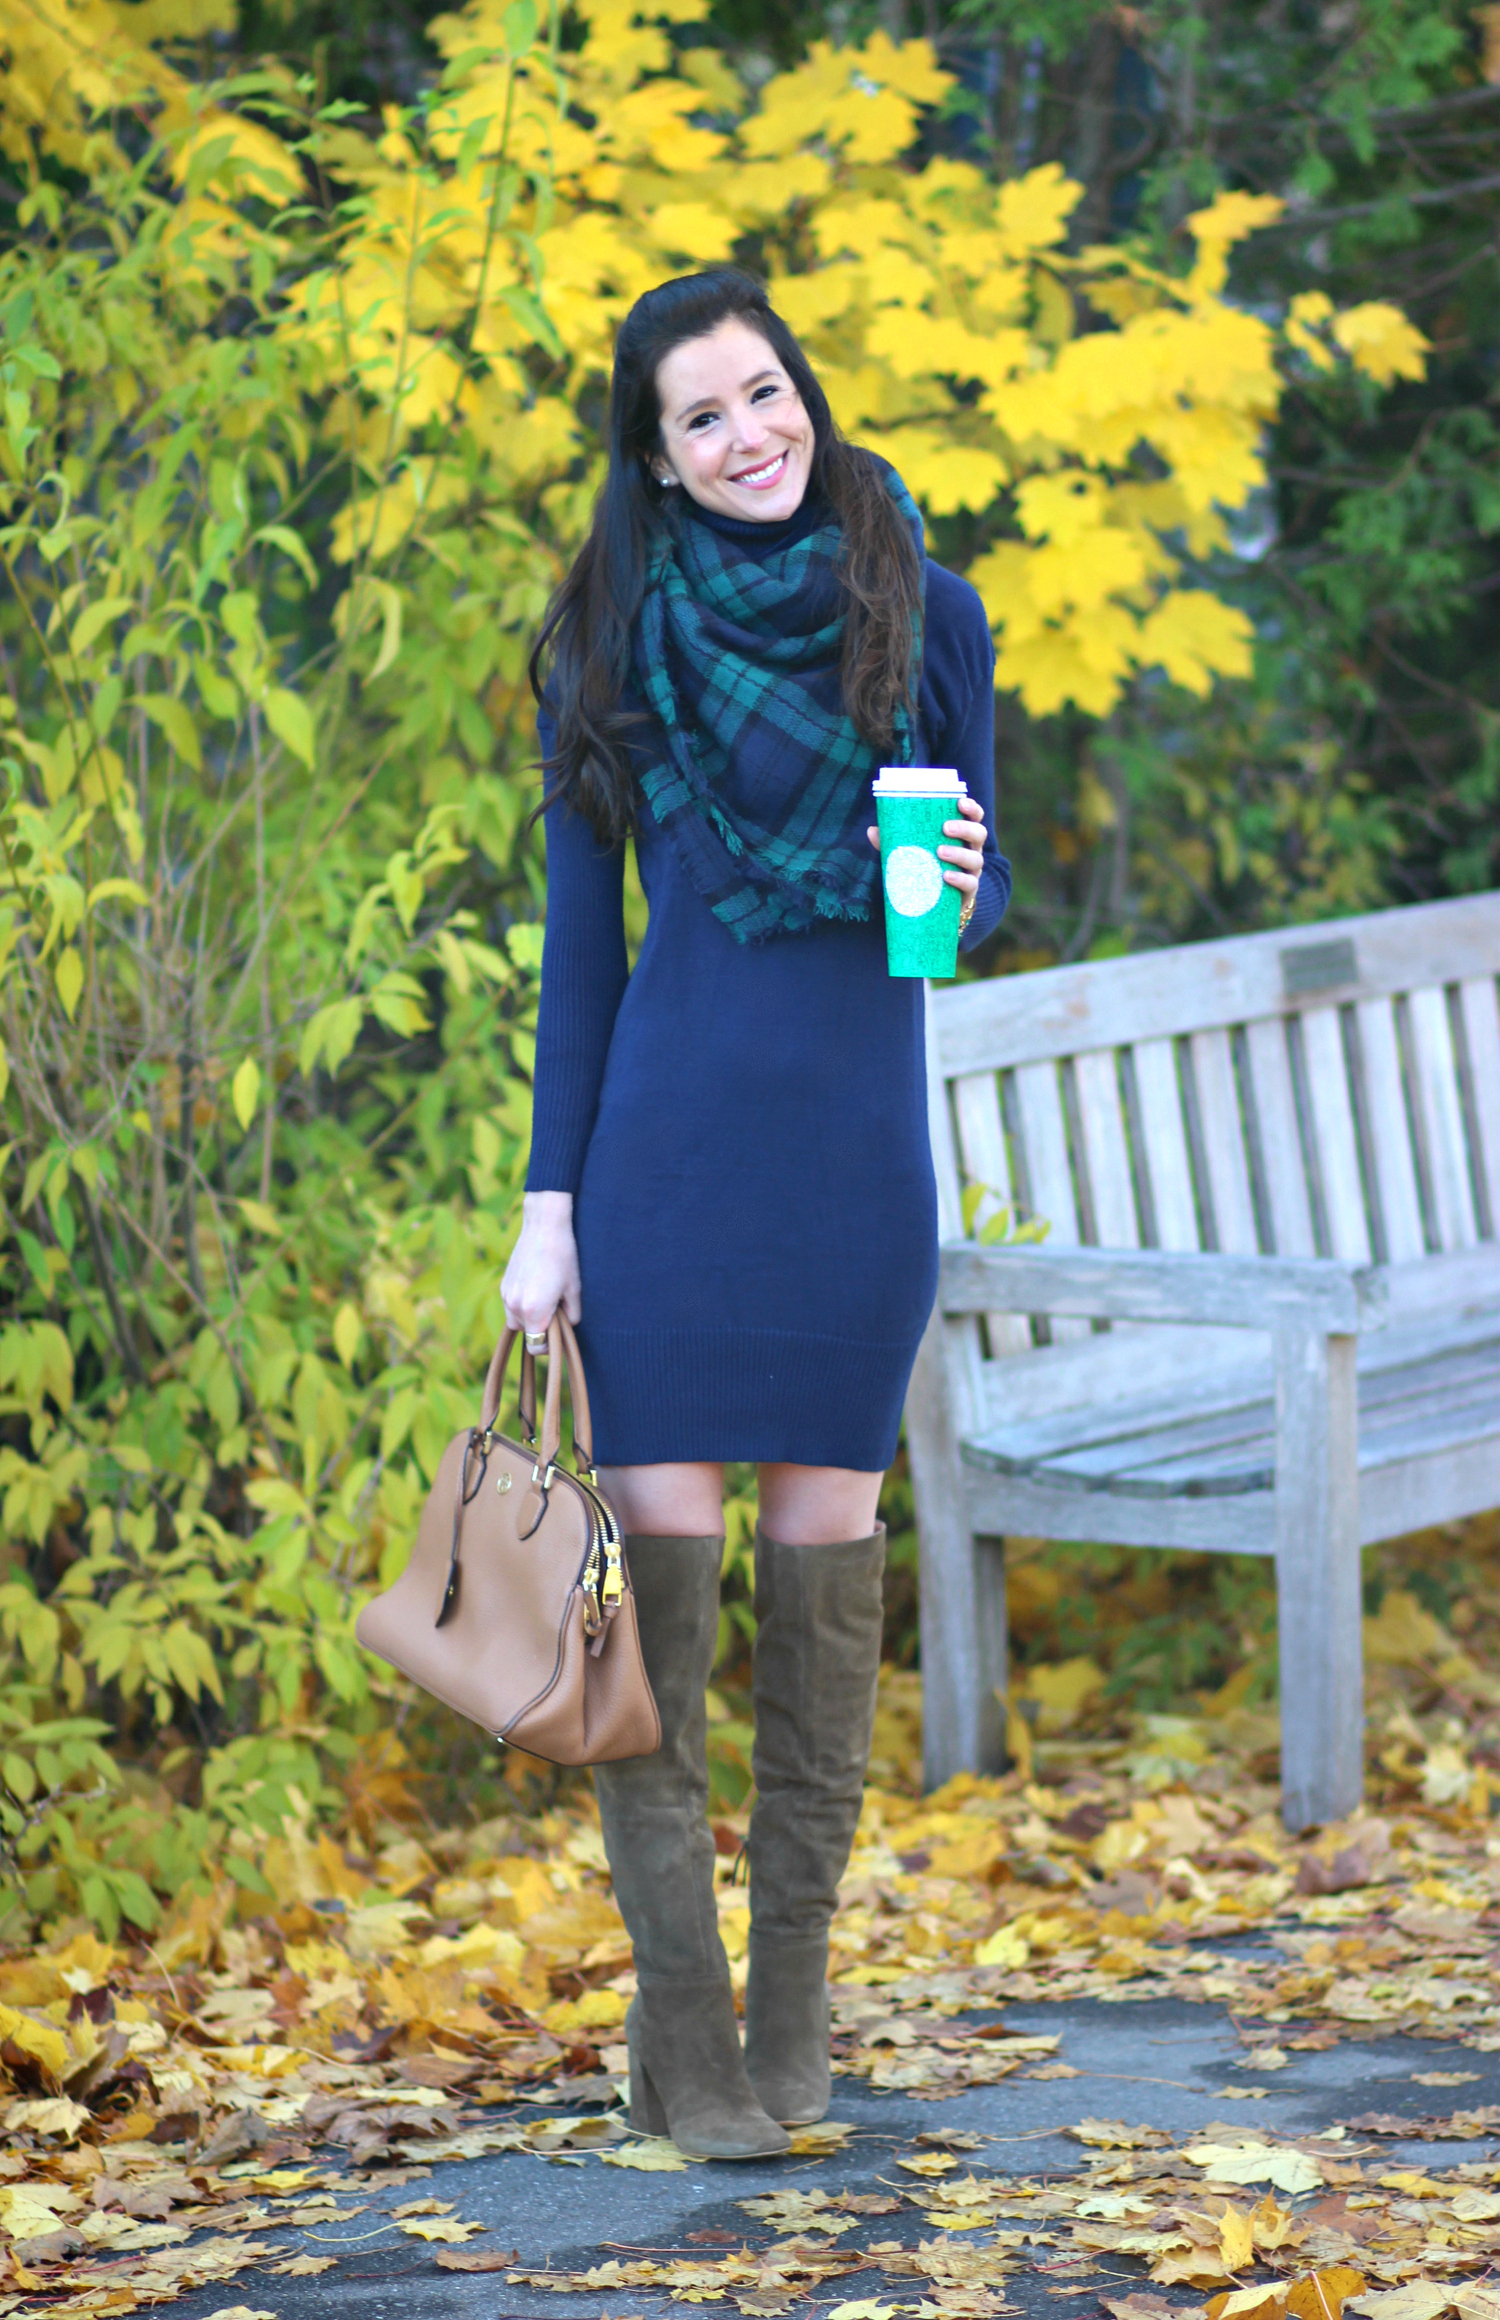 Healthy smile tips with classic navy turtleneck sweater dress outfit details